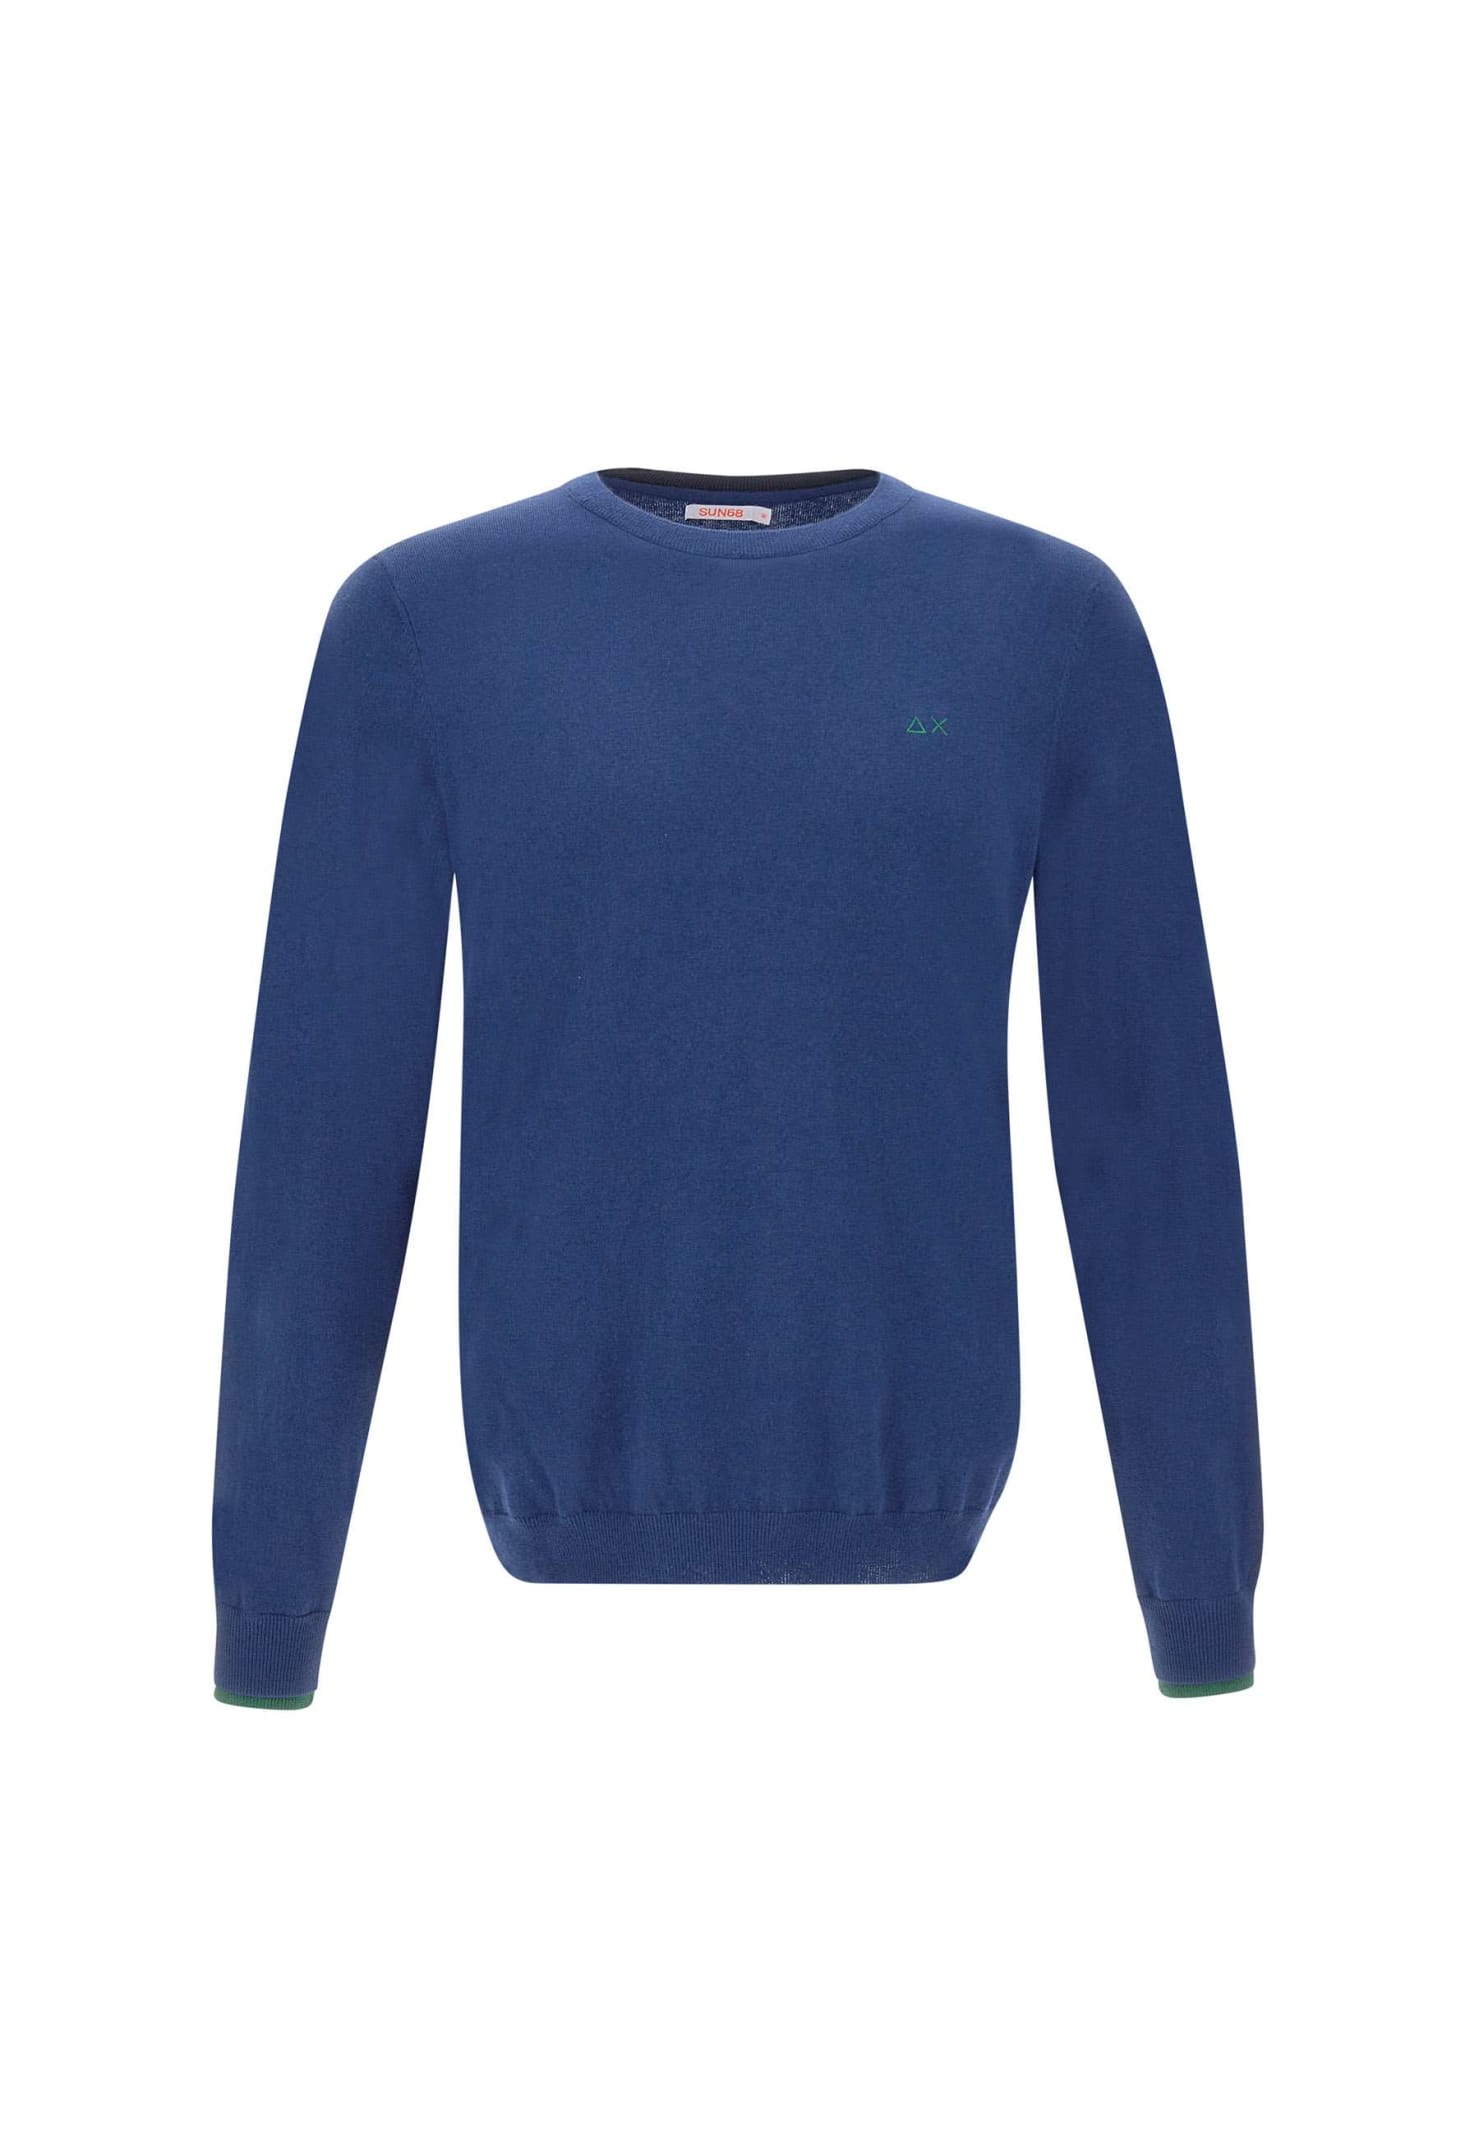 Sun 68 round Double Cotton And Wool Pullover